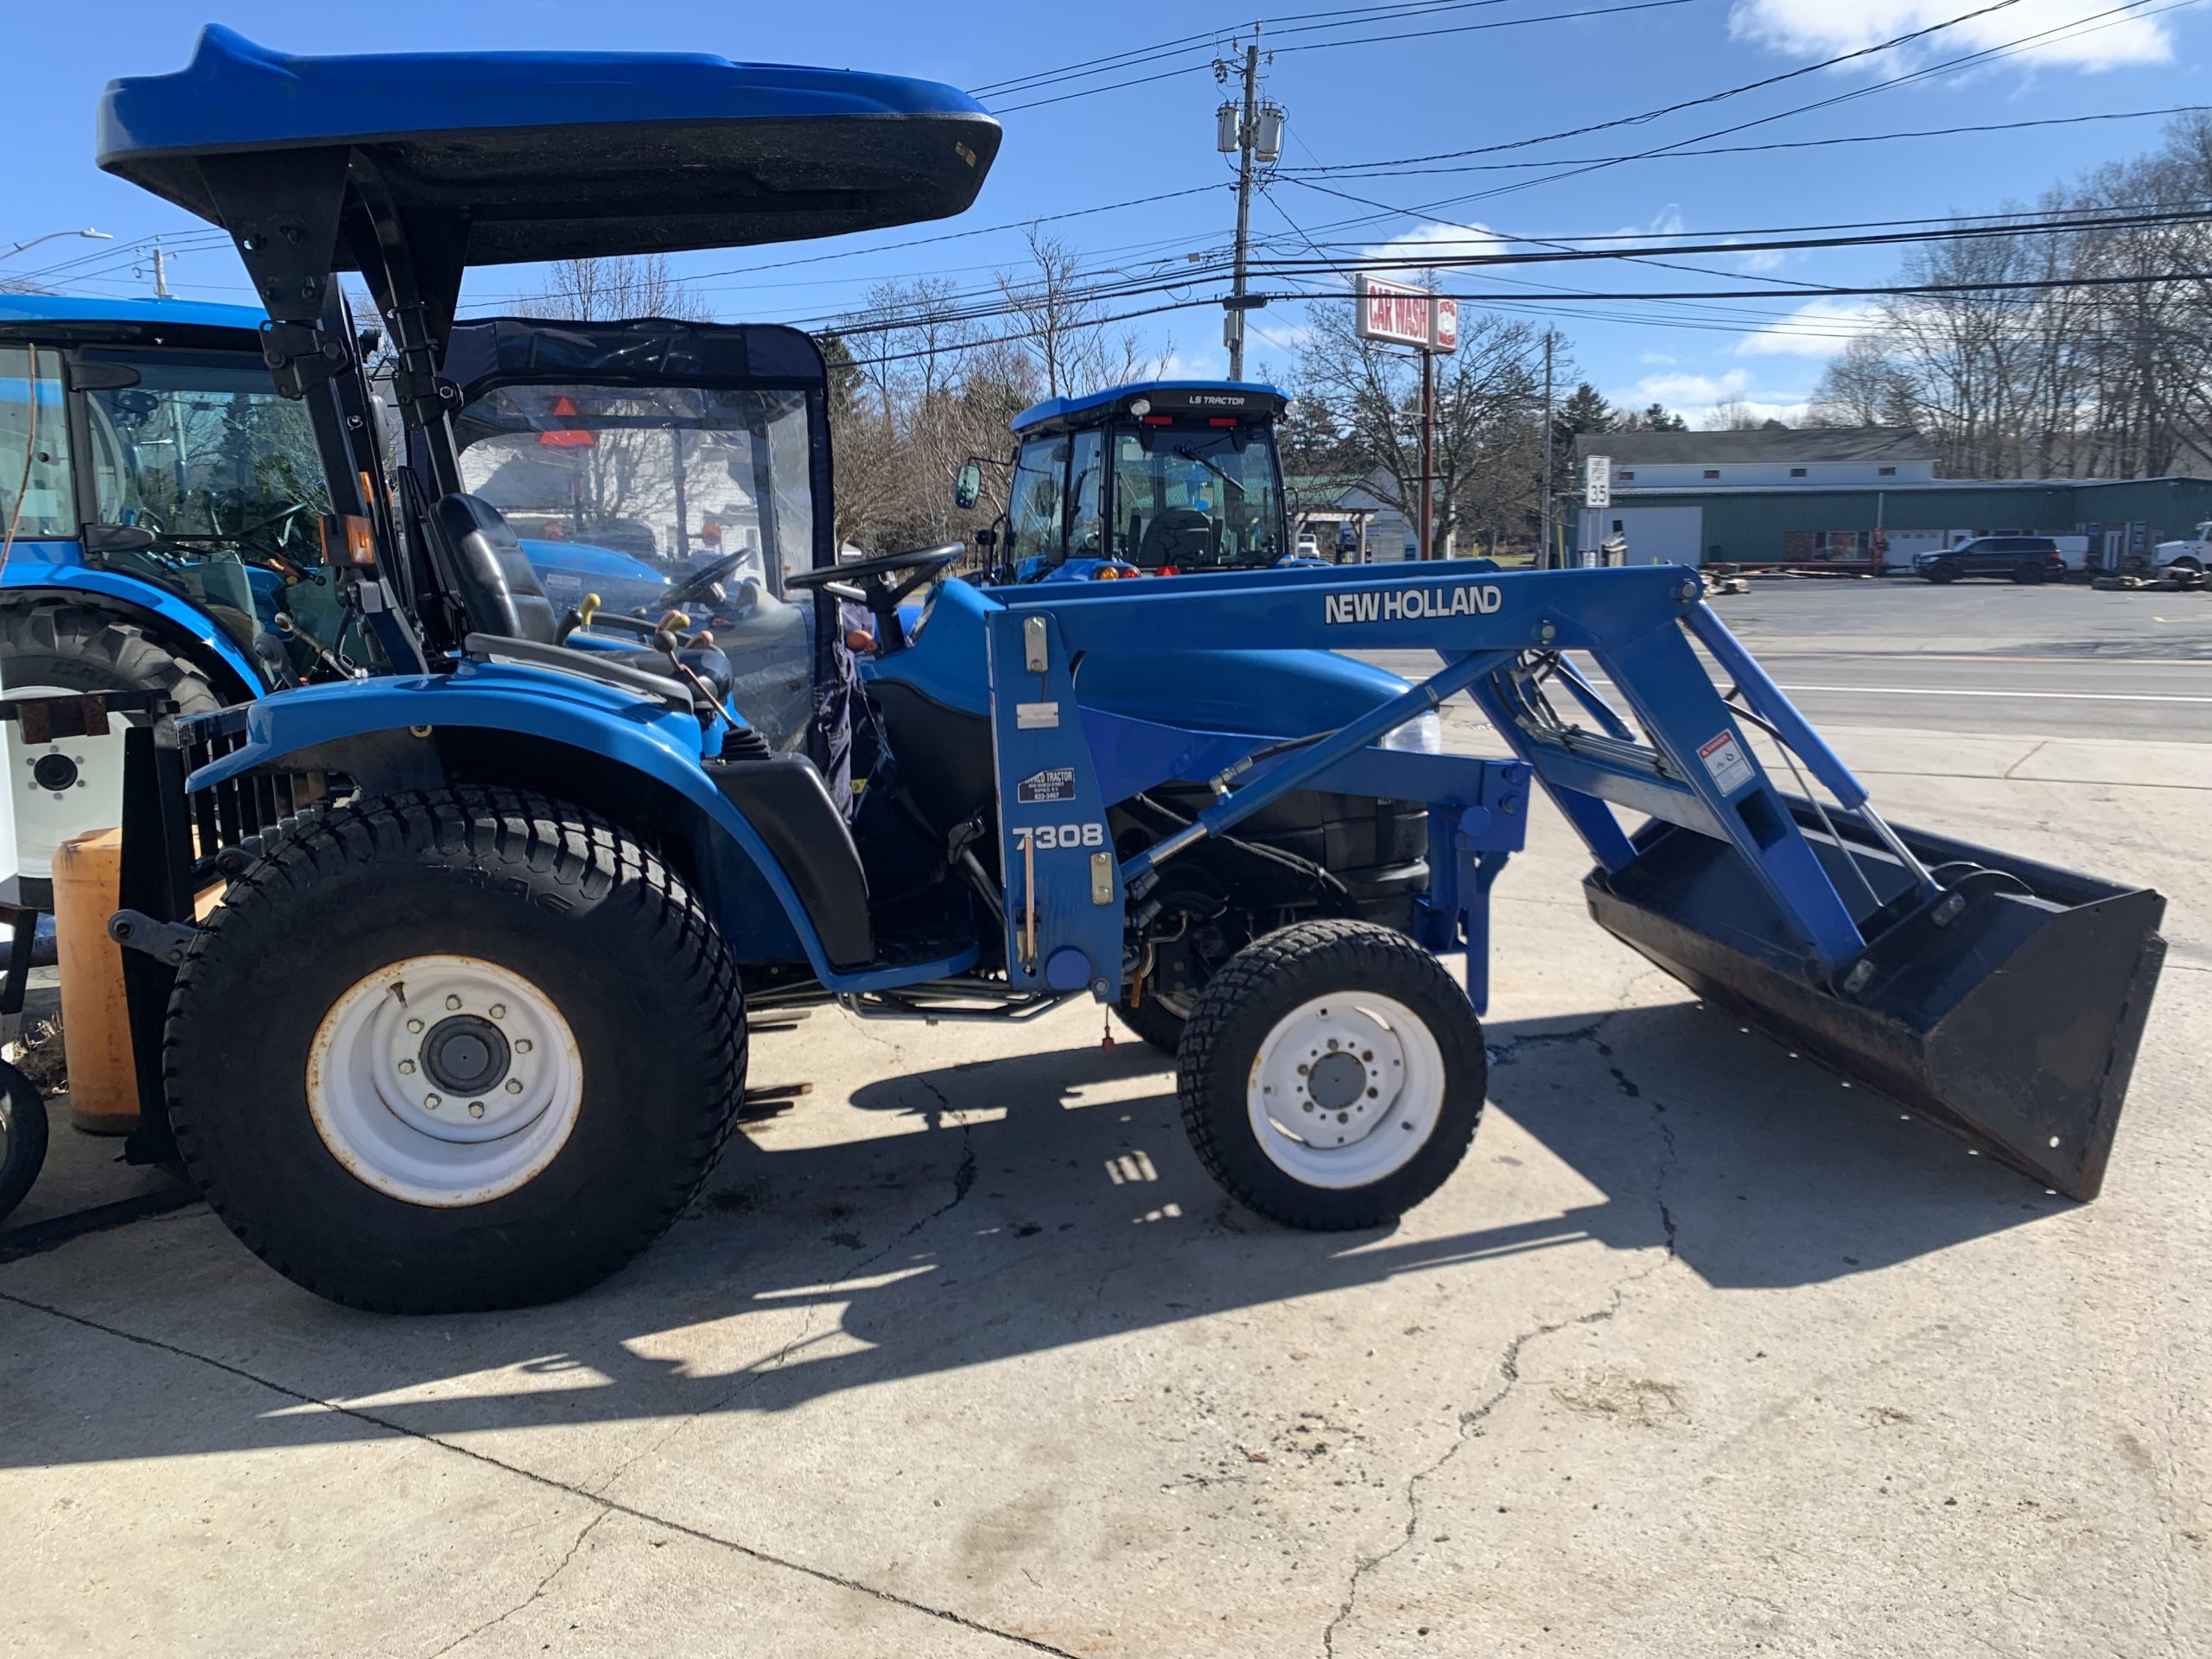 Ford New Holland TC29 approx. 888 hours, 4WD, turf tires. Asking 14,500.00 cash